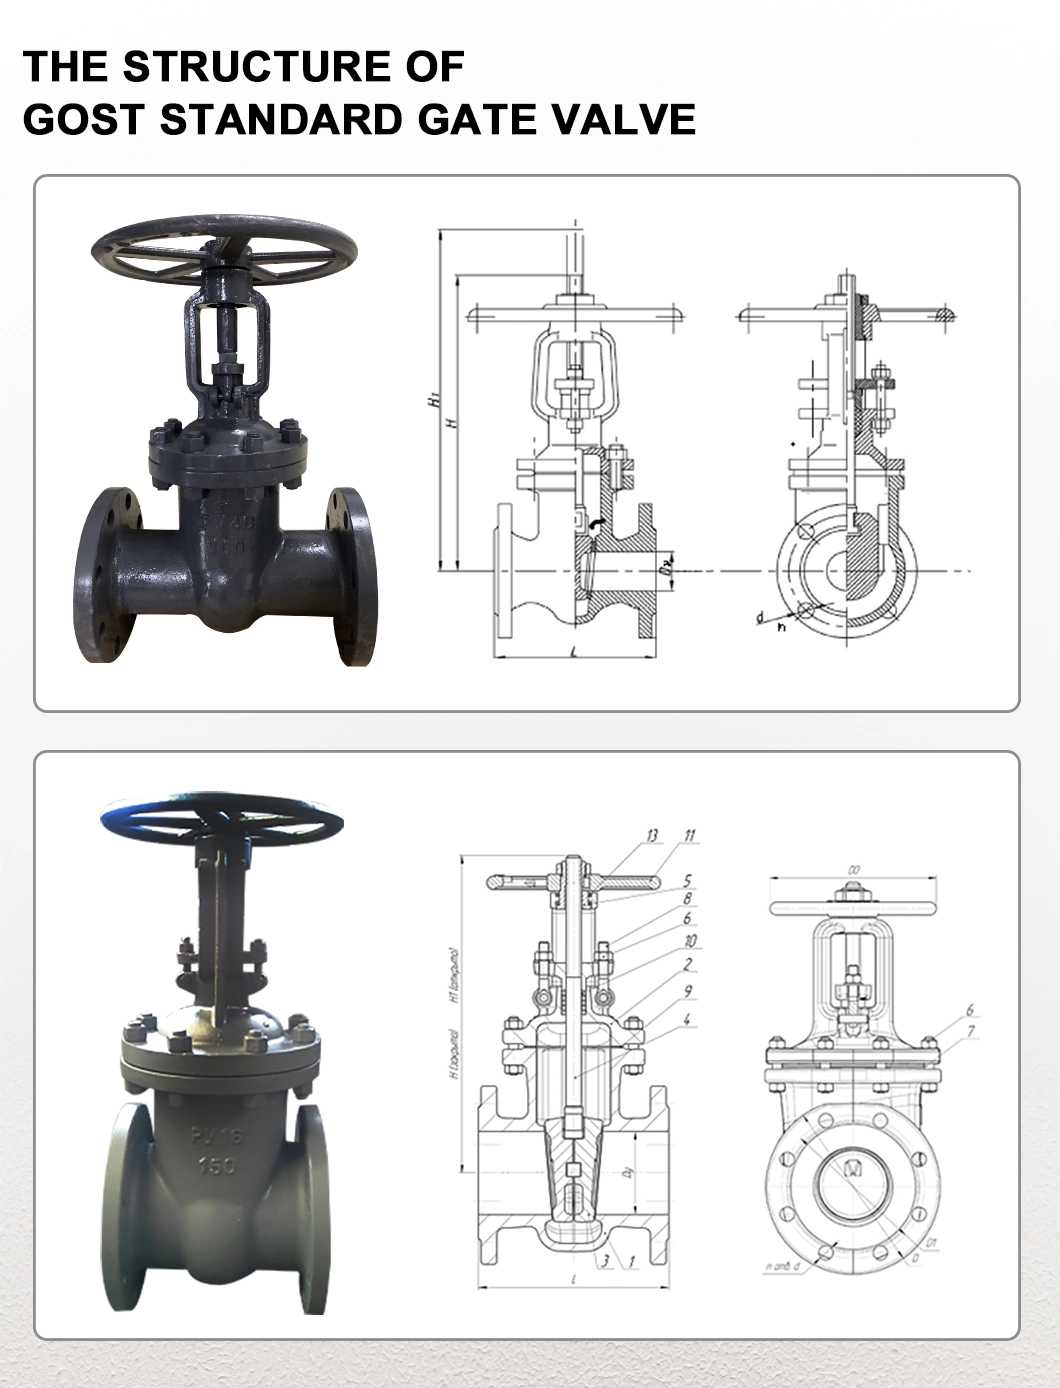 Customized API 6D Wcb 4 Inch 6 Inch Class 300 Flat Flange Ends Hot Oil Gate Valve Water Drinking Water and Other Media